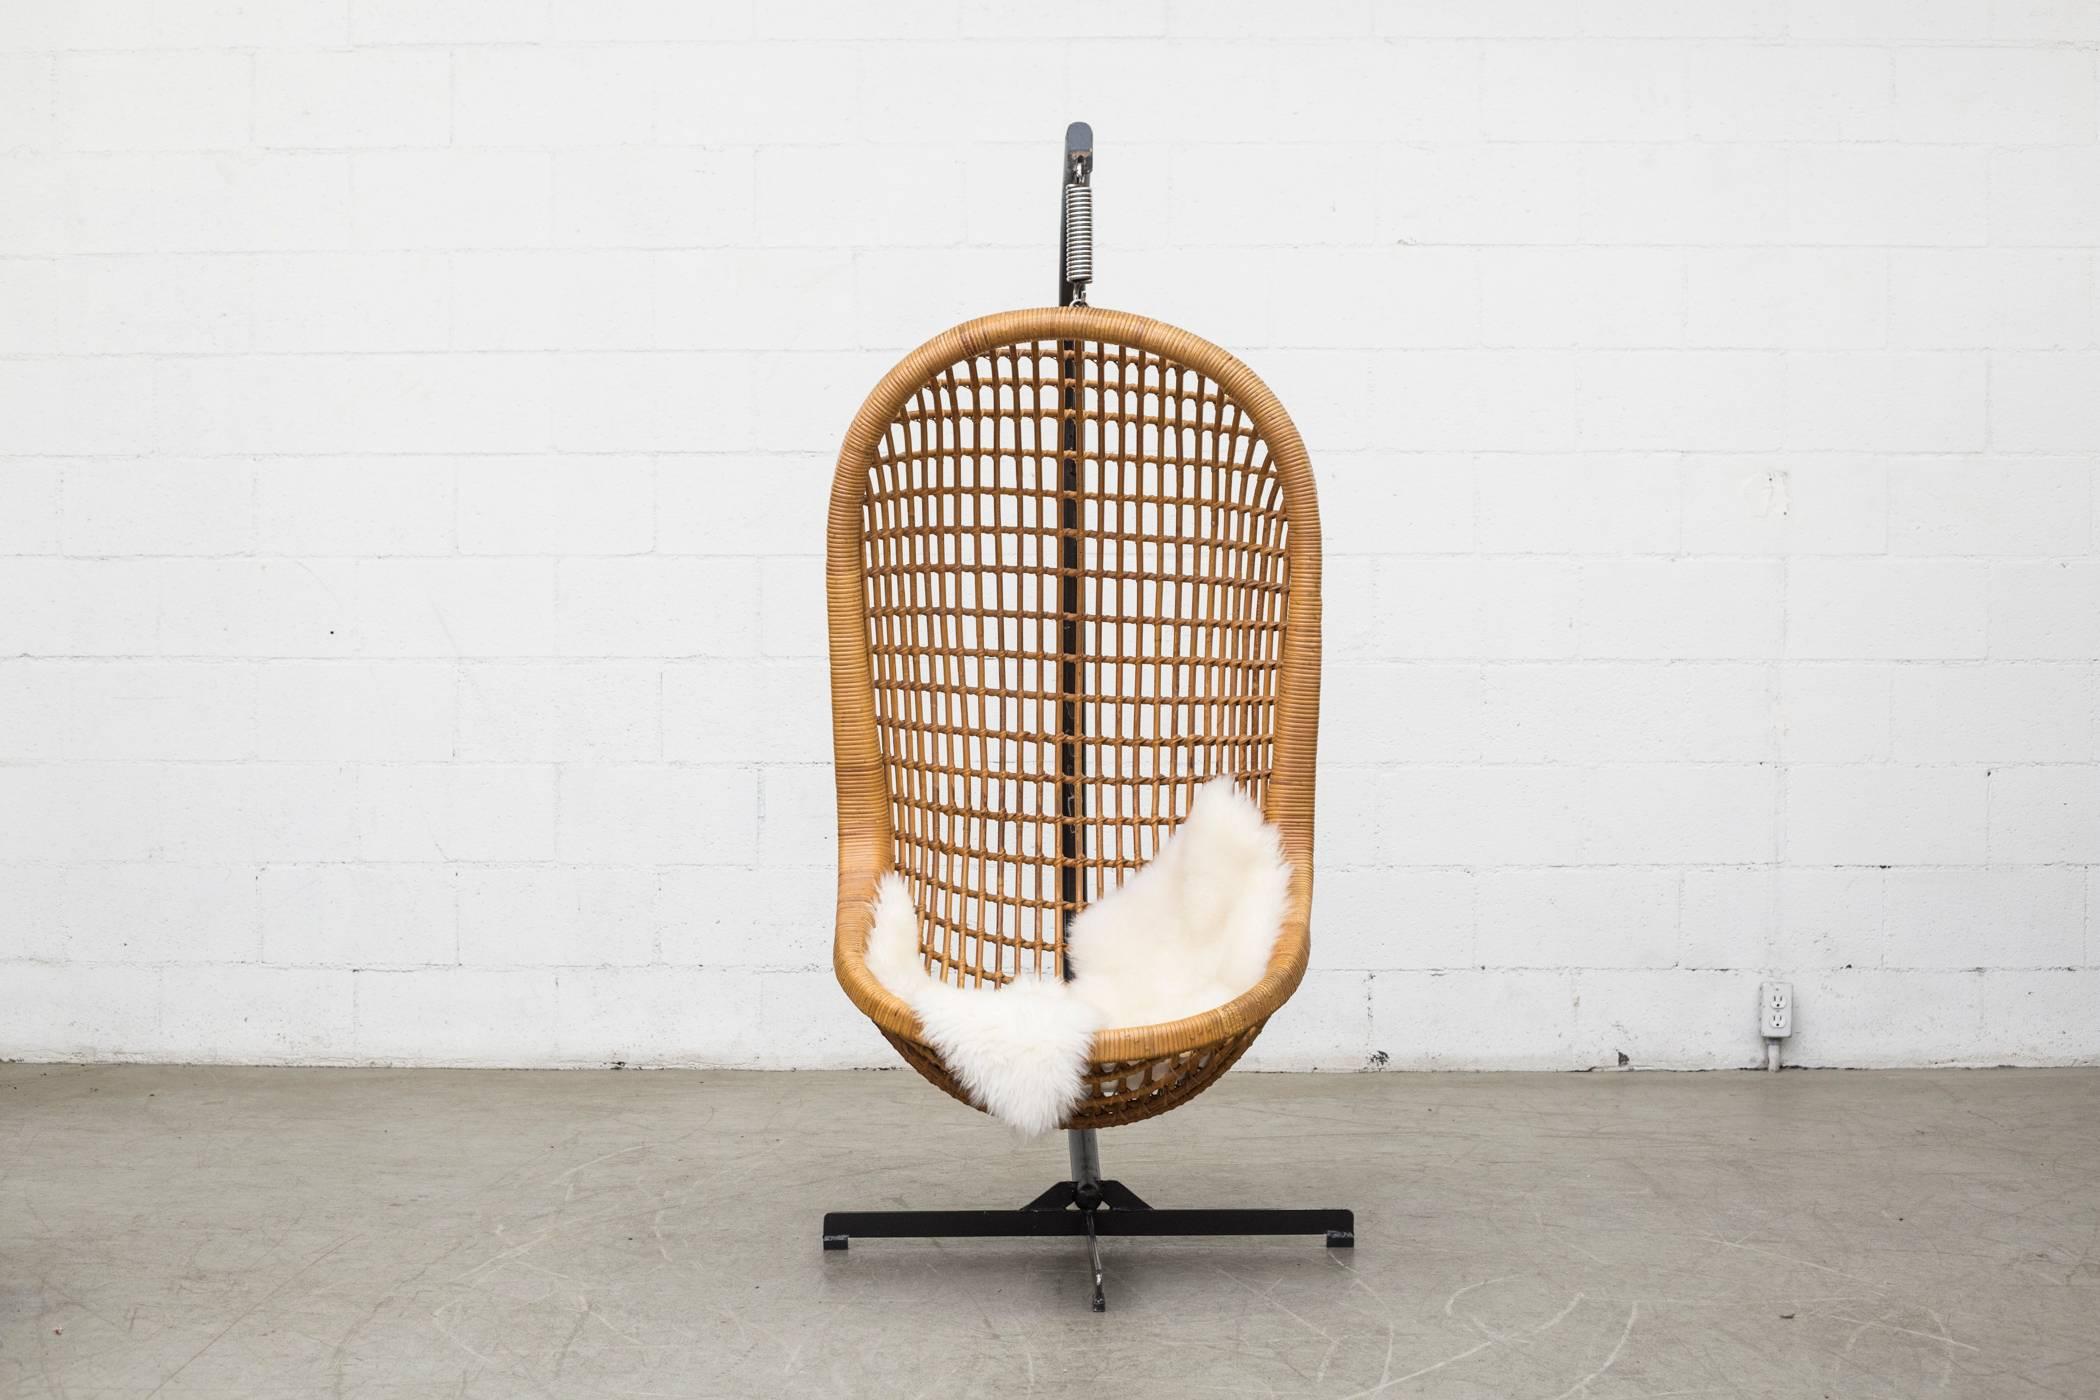 Straight from 1970s heaven. Beautifully woven rattan free-hanging basket chair. Held by heavy black enameled metal base with spring support. Estimated to hold about 200 pounds of weight. (Sheepskin not included).